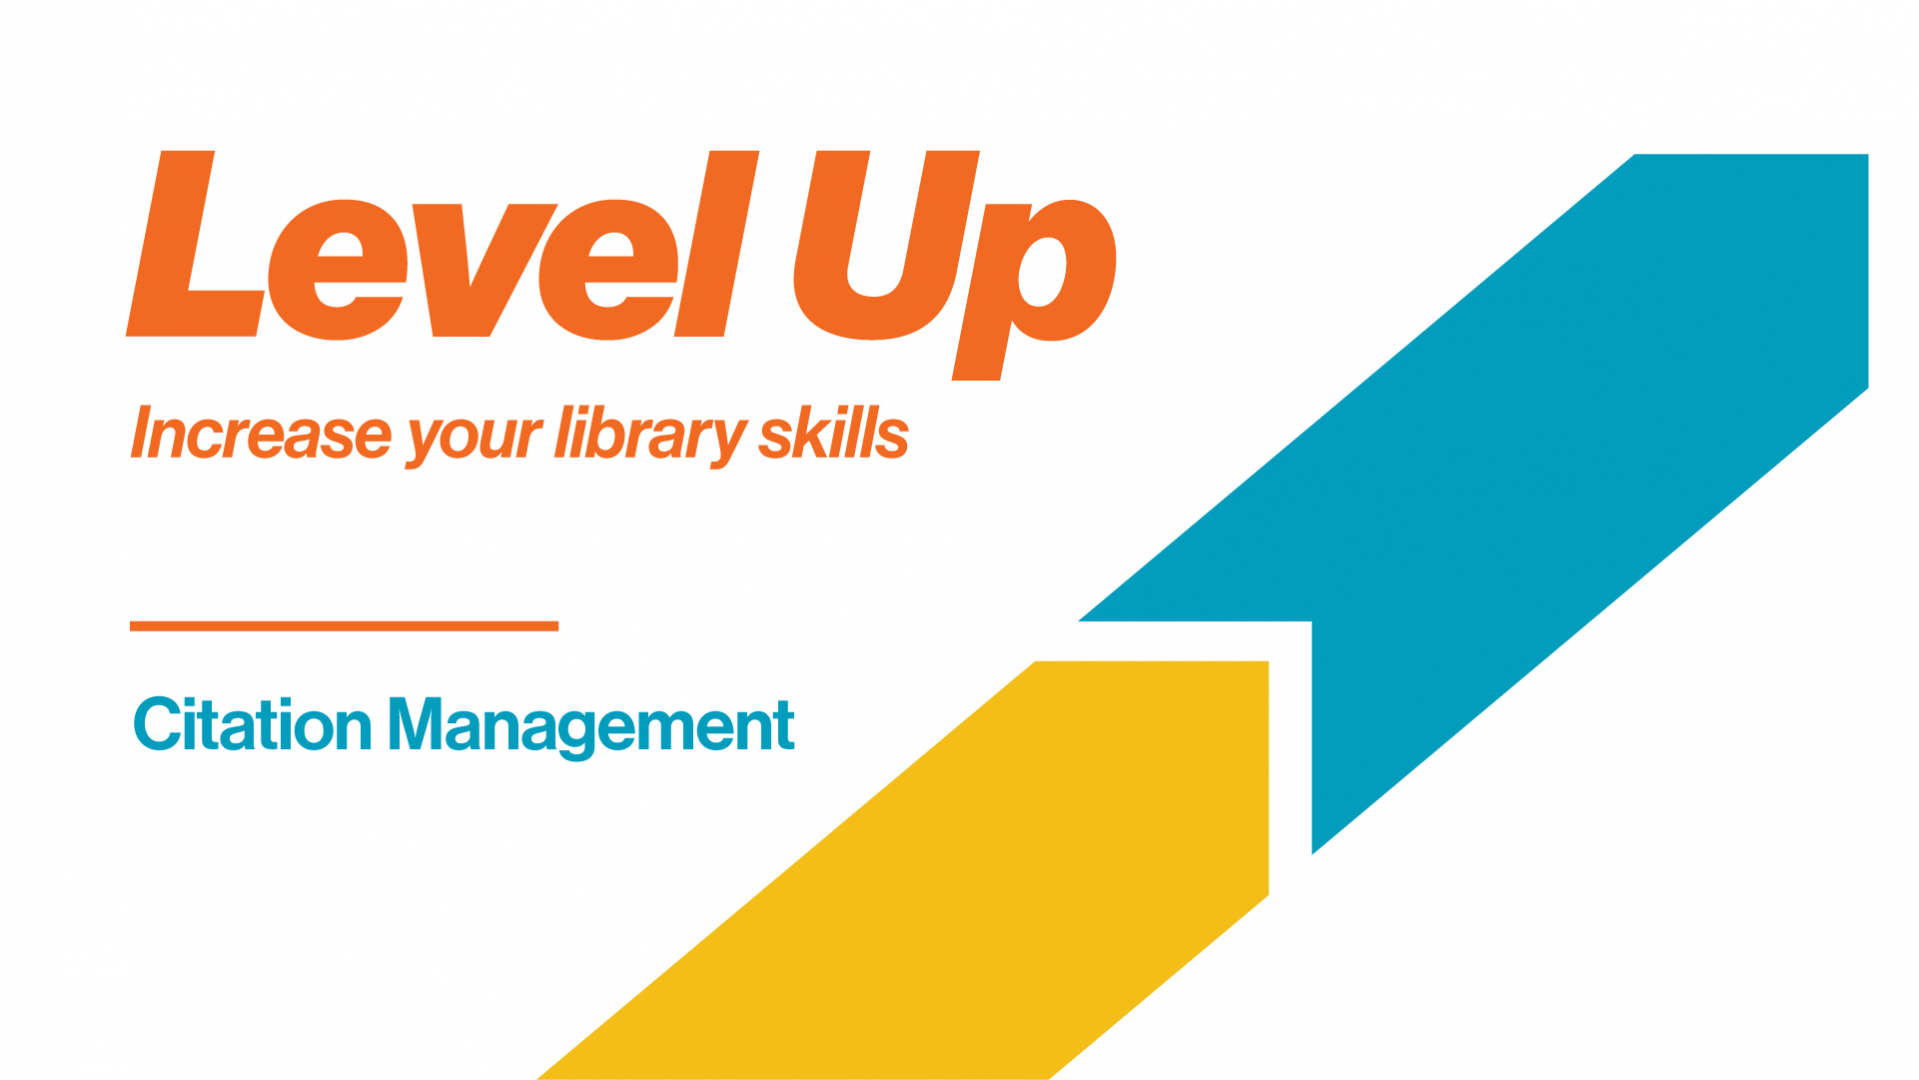 Level Up: Increase your library skills with citation management